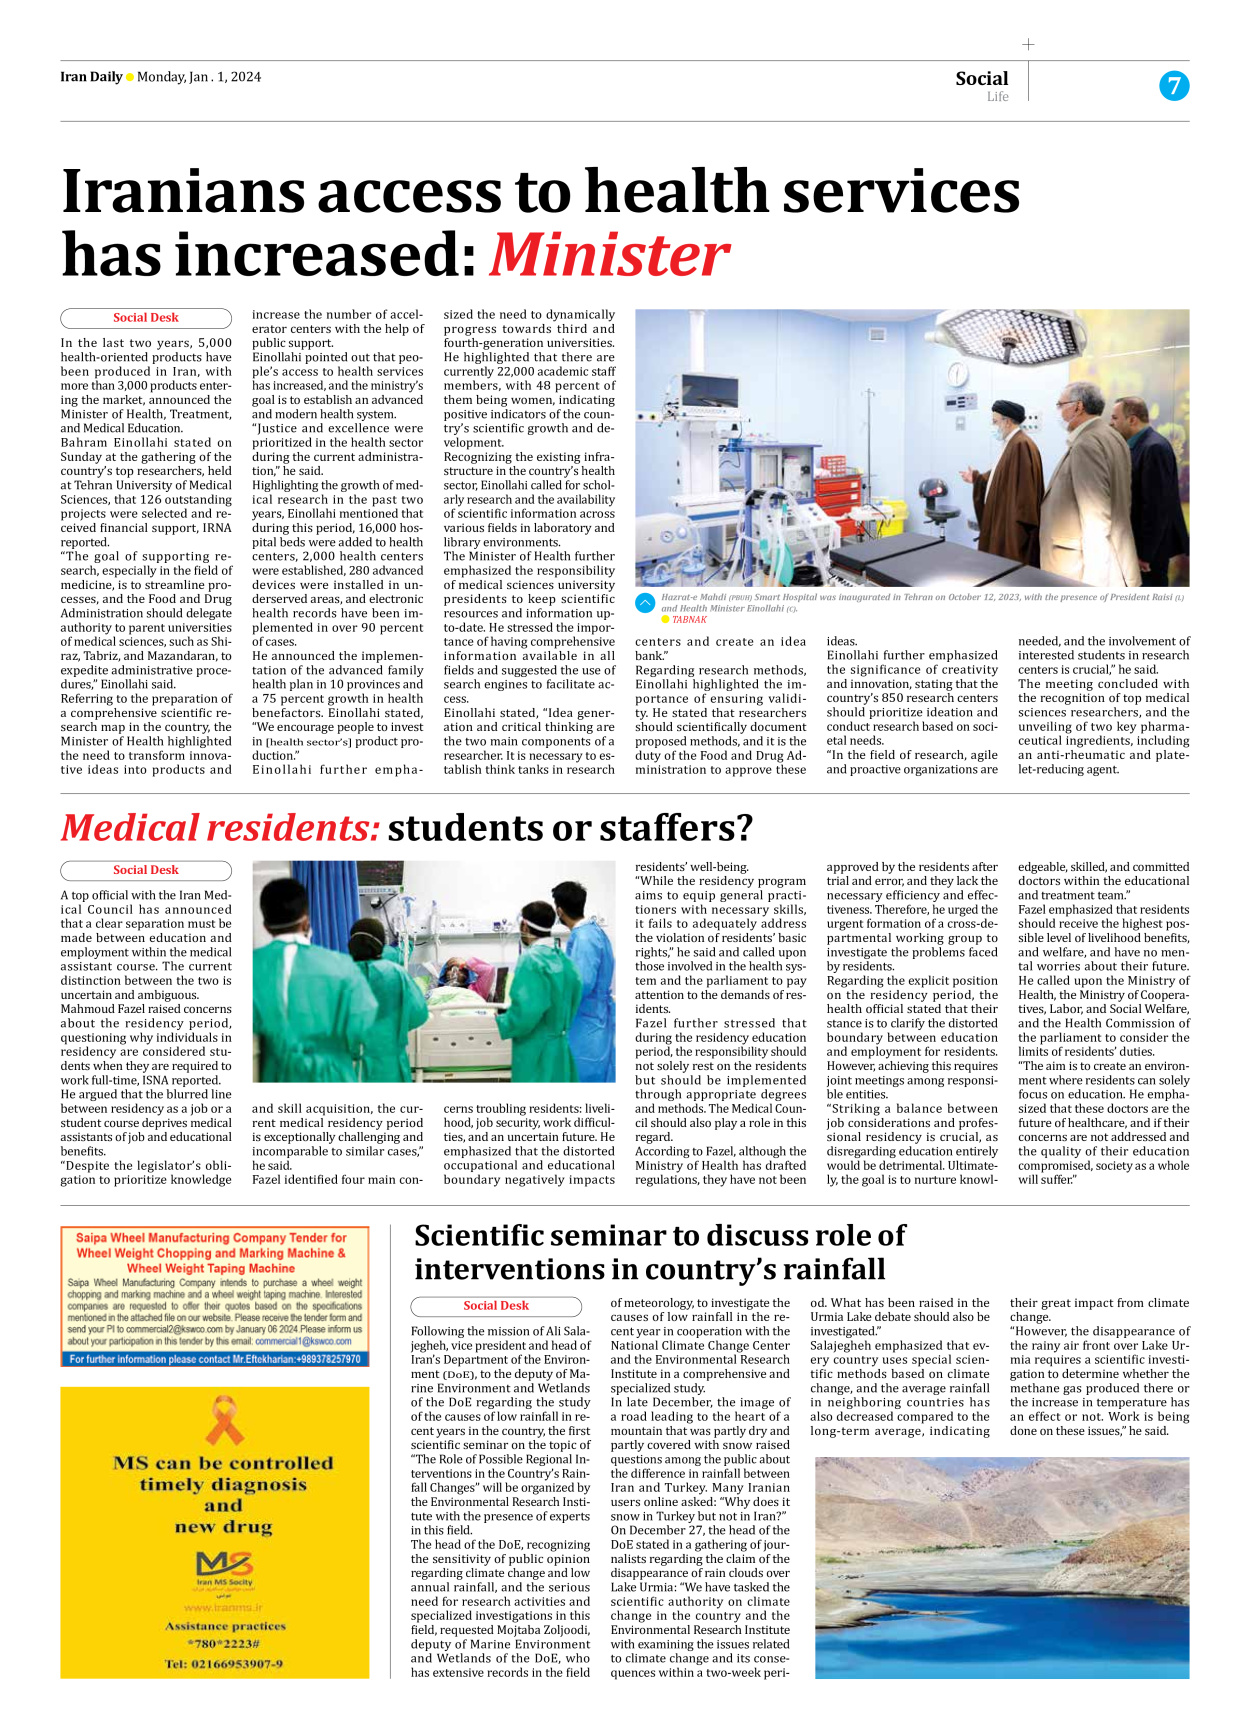 Iran Daily - Number Seven Thousand Four Hundred and Seventy Three - 01 January 2024 - Page 7